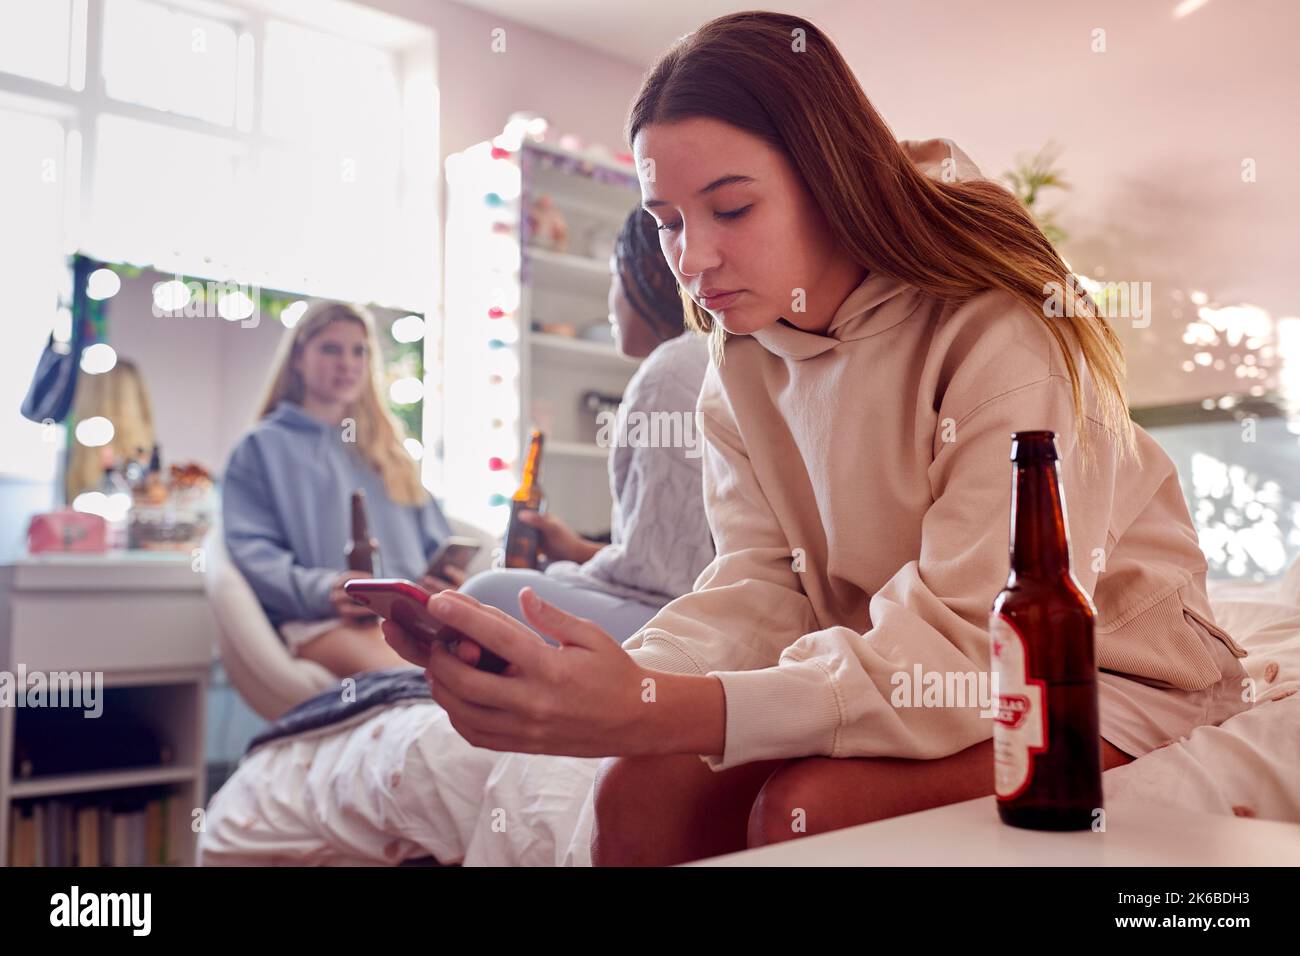 Group Of Teenage Girls In Bedroom Drinking Bottles Of Beer And Looking At Mobile Phones Stock Photo